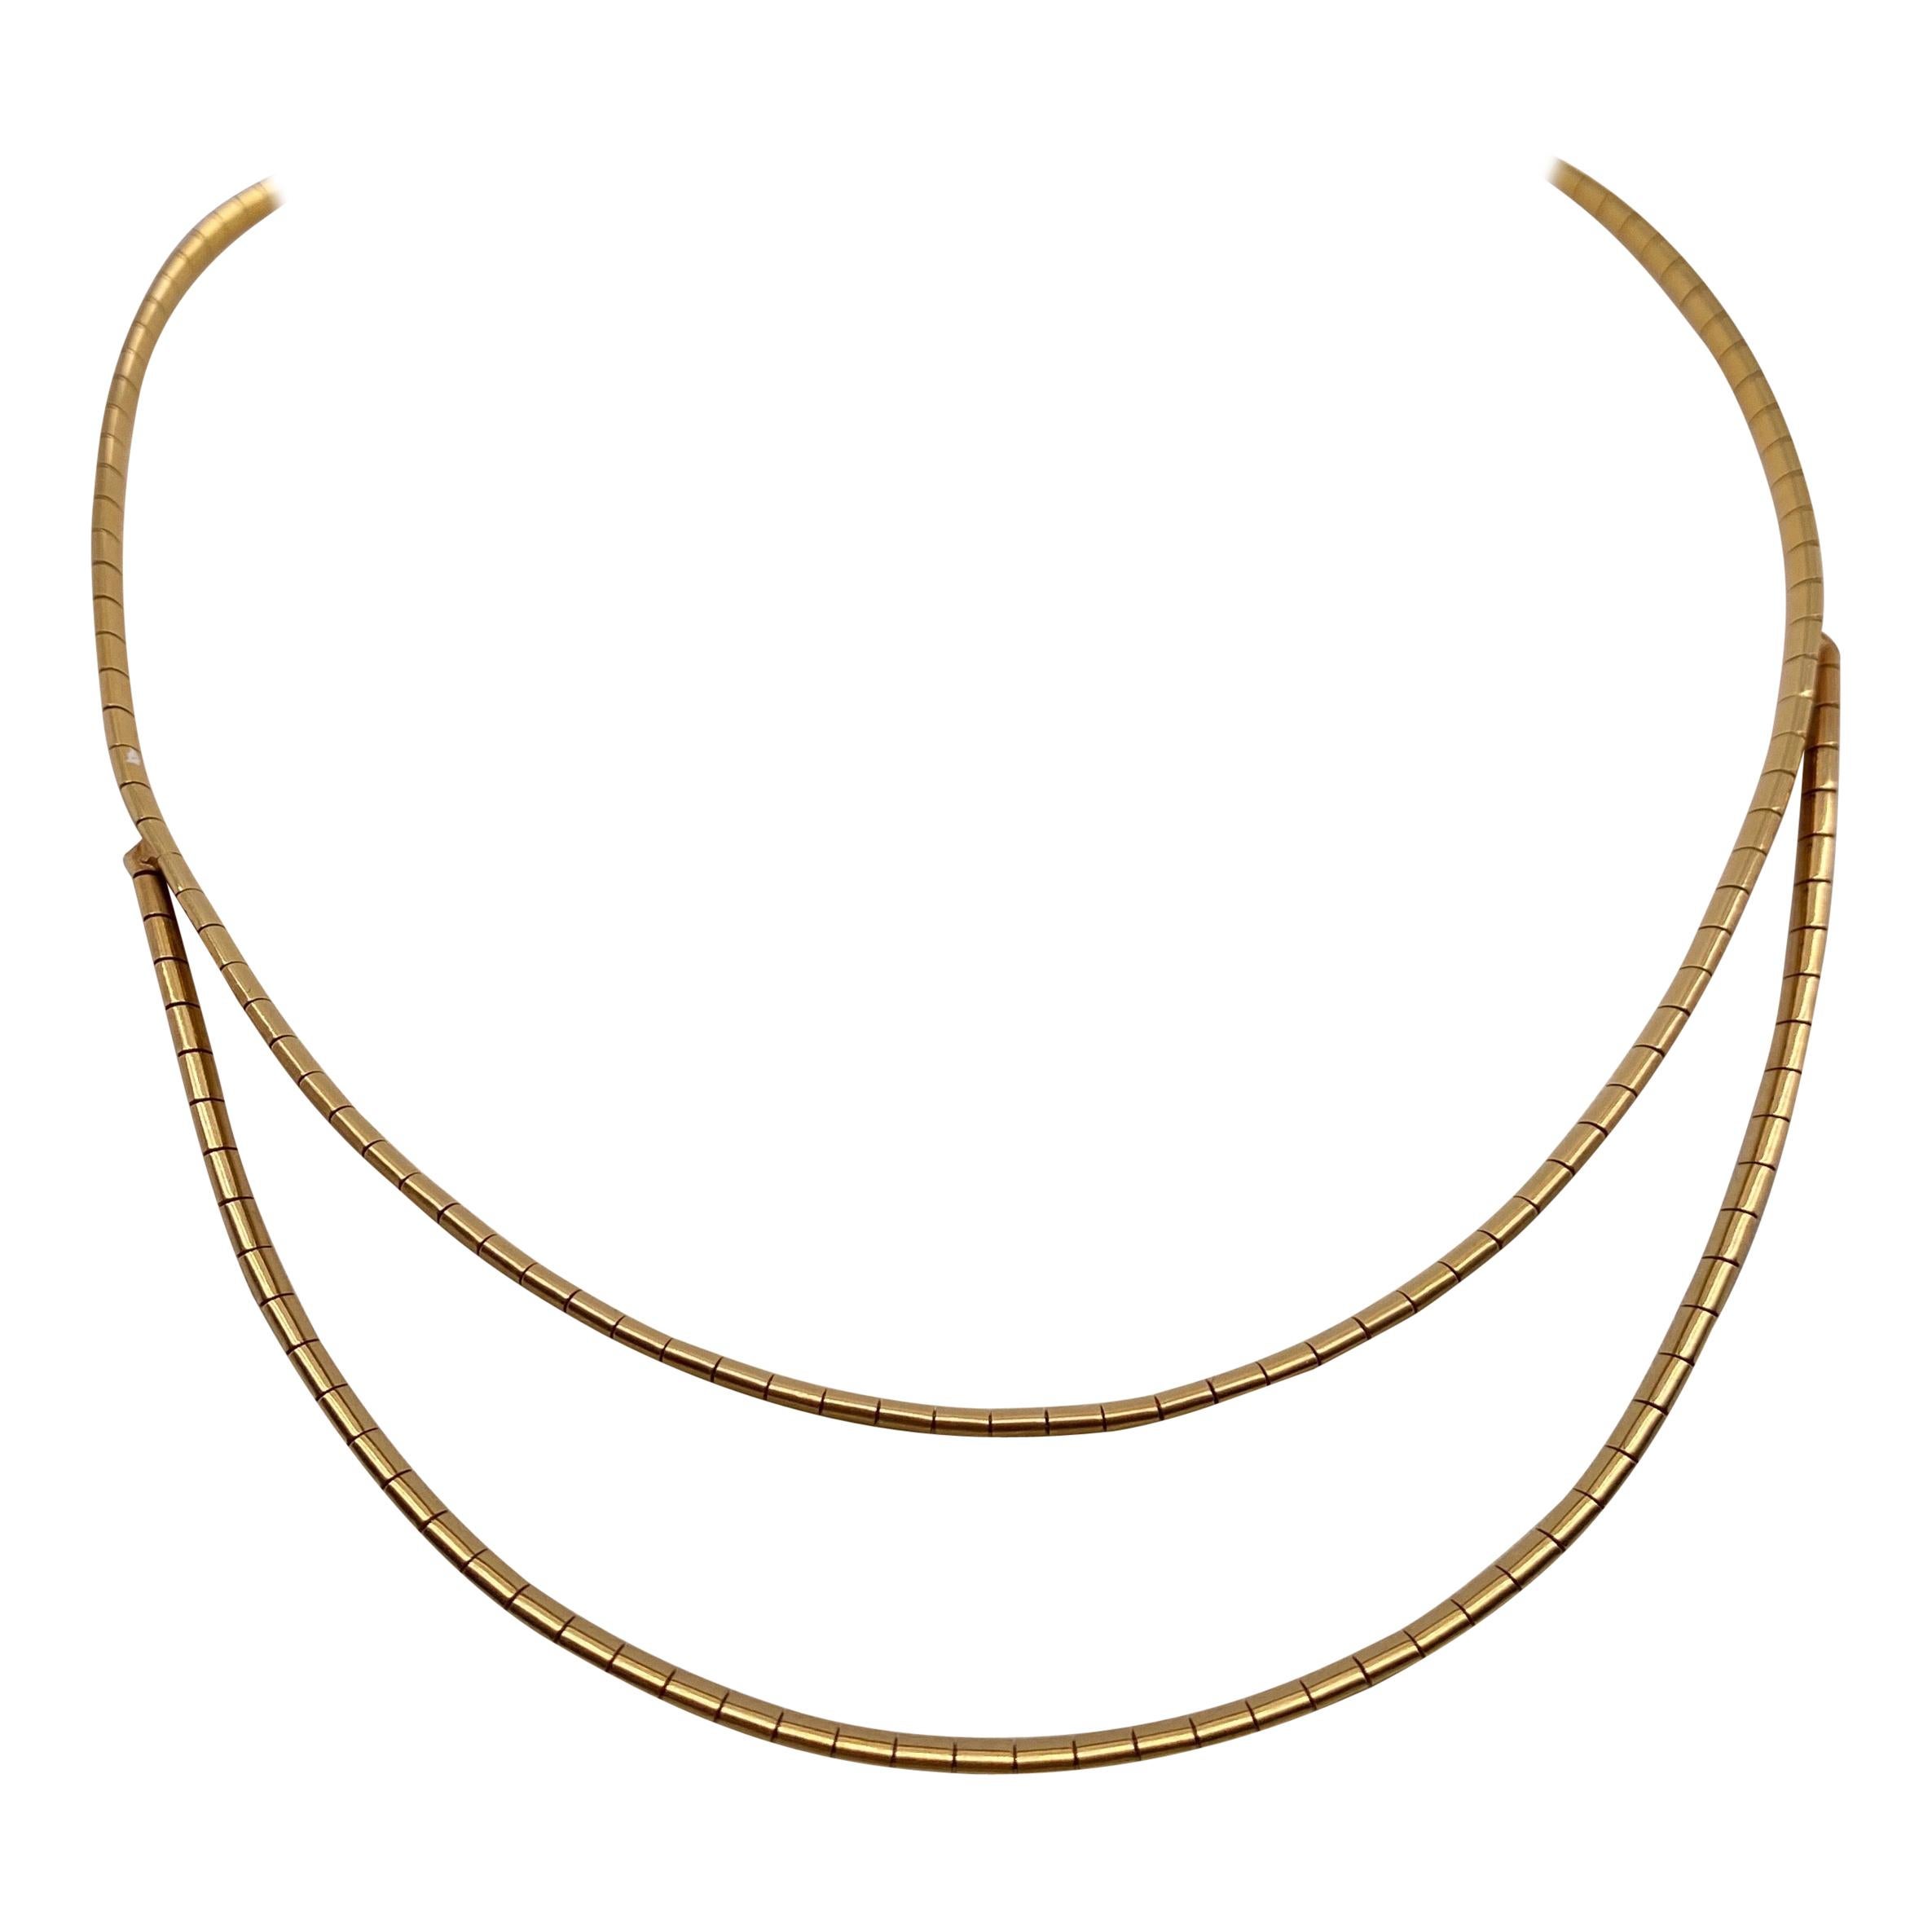 Vintage 1980's 14k Yellow Gold Layered Omega Necklace